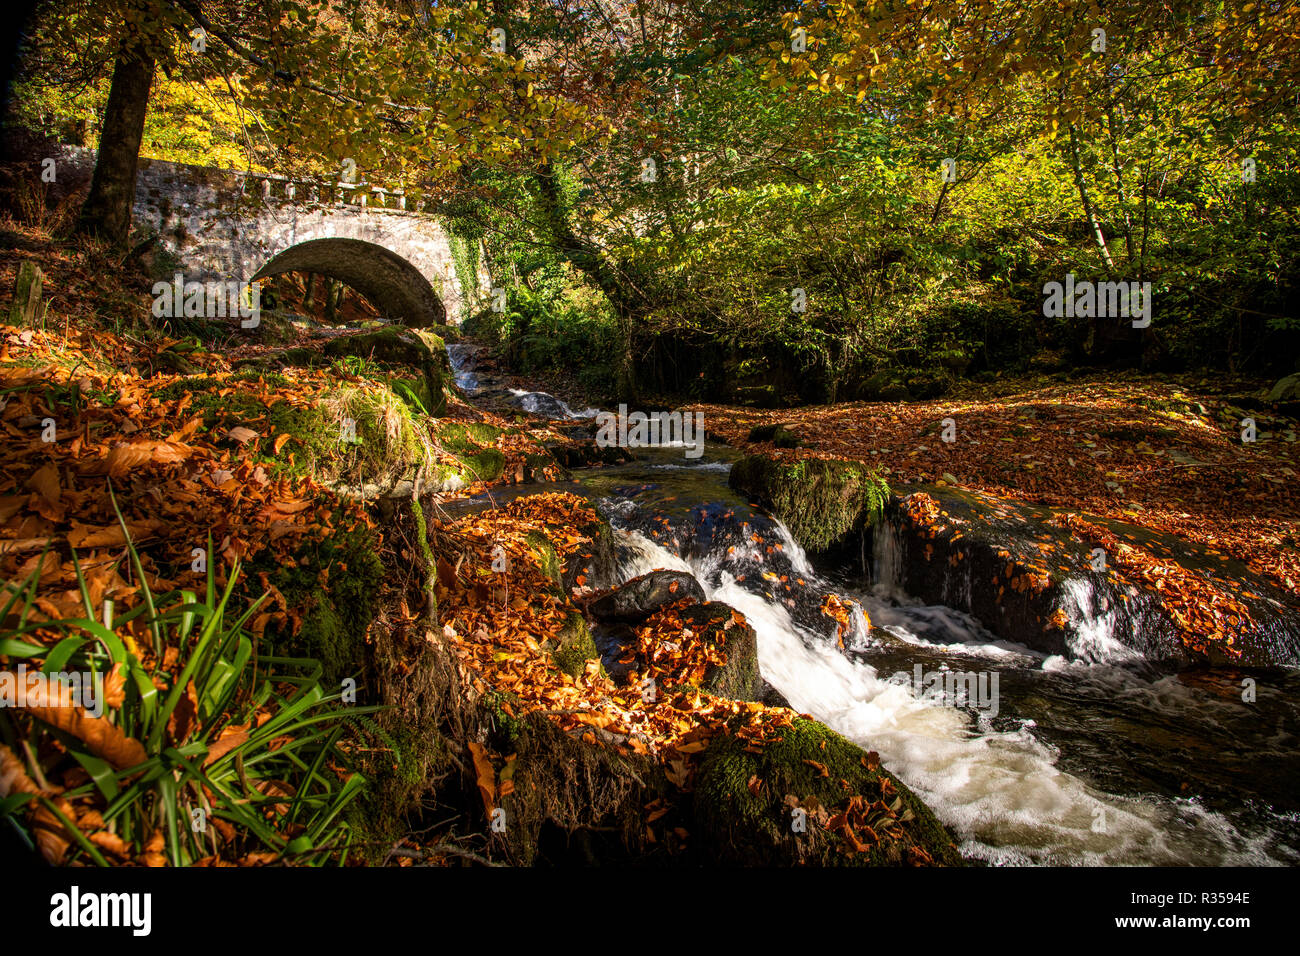 Shankhill river at Cloghleagh Stock Photo